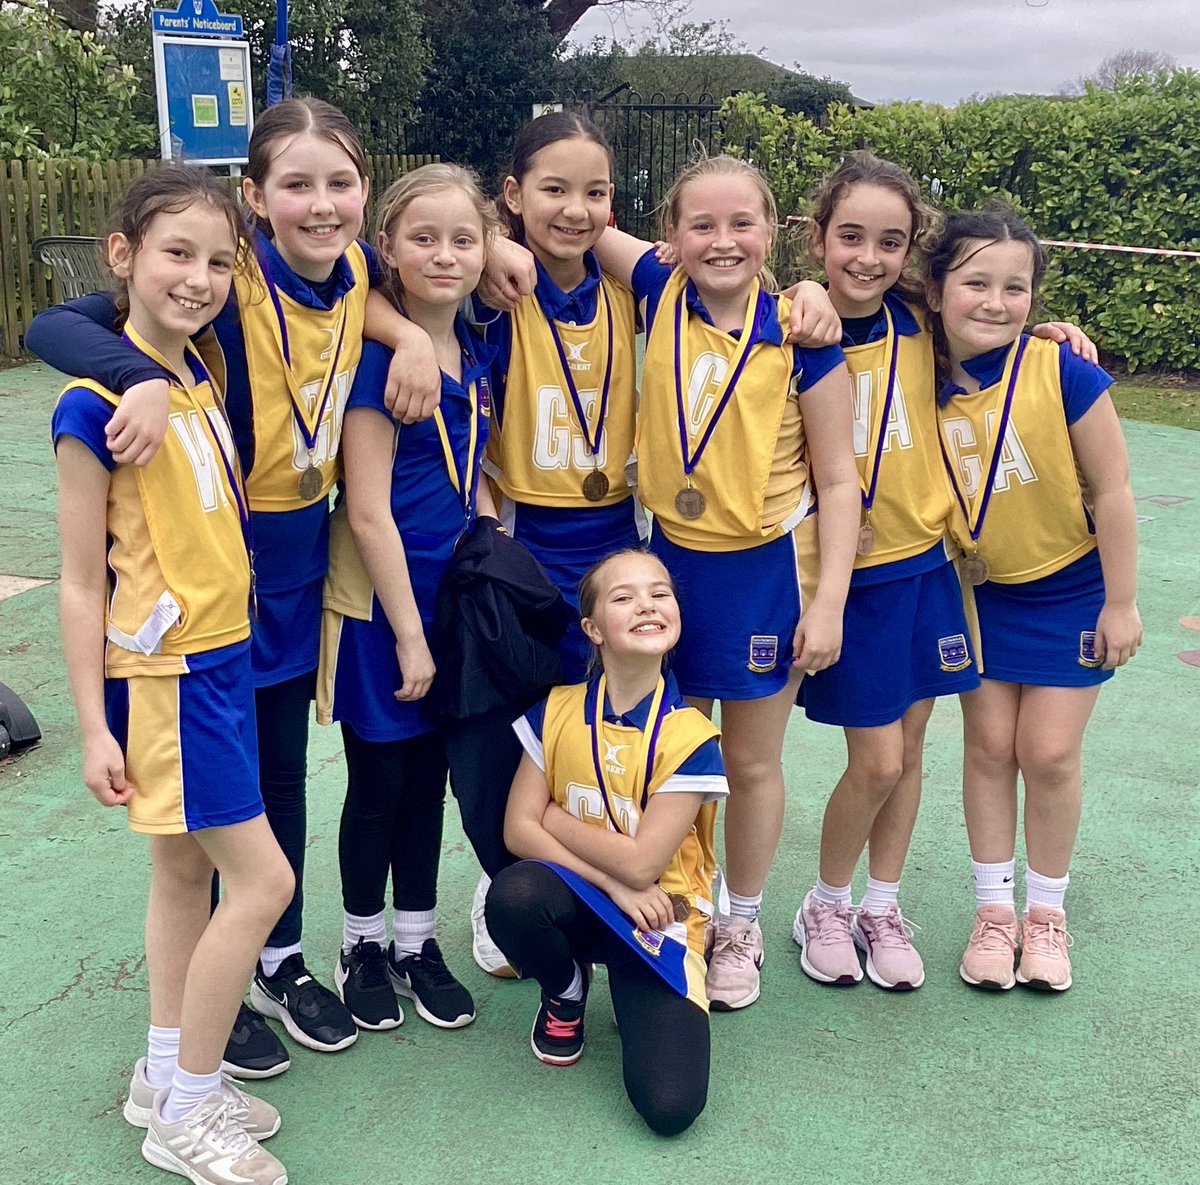 Congratulations to the U10 netball team who finished in 3rd place at the ISA regional finals held at @UrsulinePrep A Great achievement! #StNicksSports #StNicksSch #StNicksLower #StNicksNetball